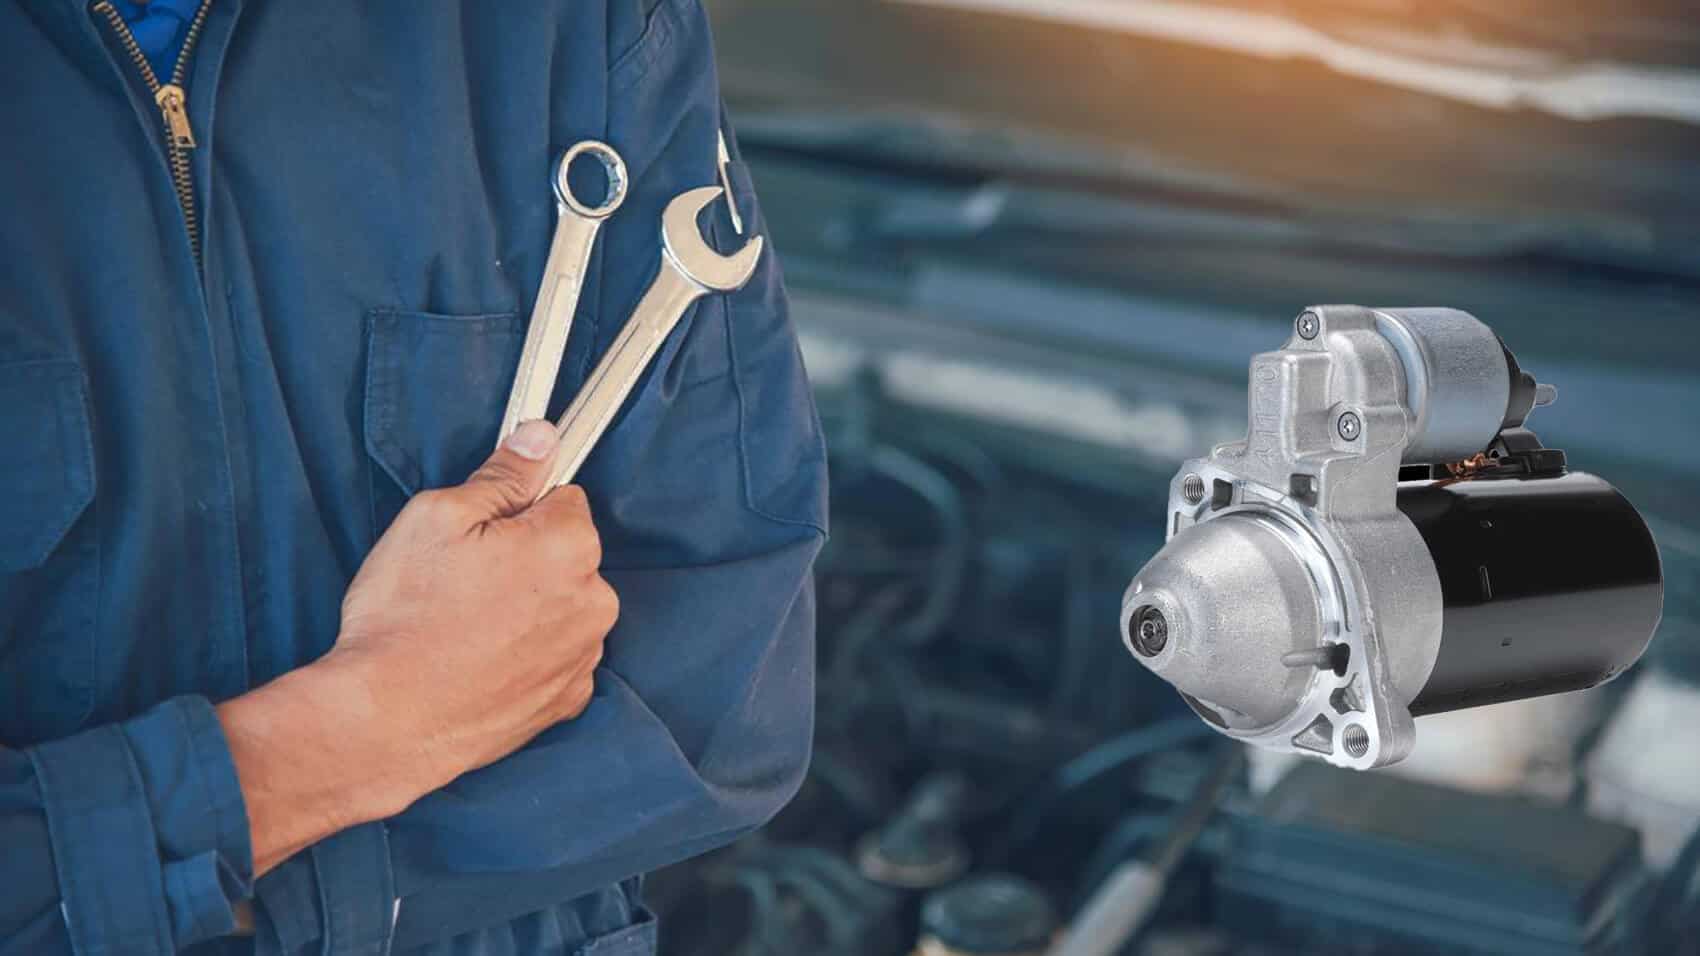 DIY vs. Professional Help: When to Call a Mobile Mechanic for Your Starter Motor